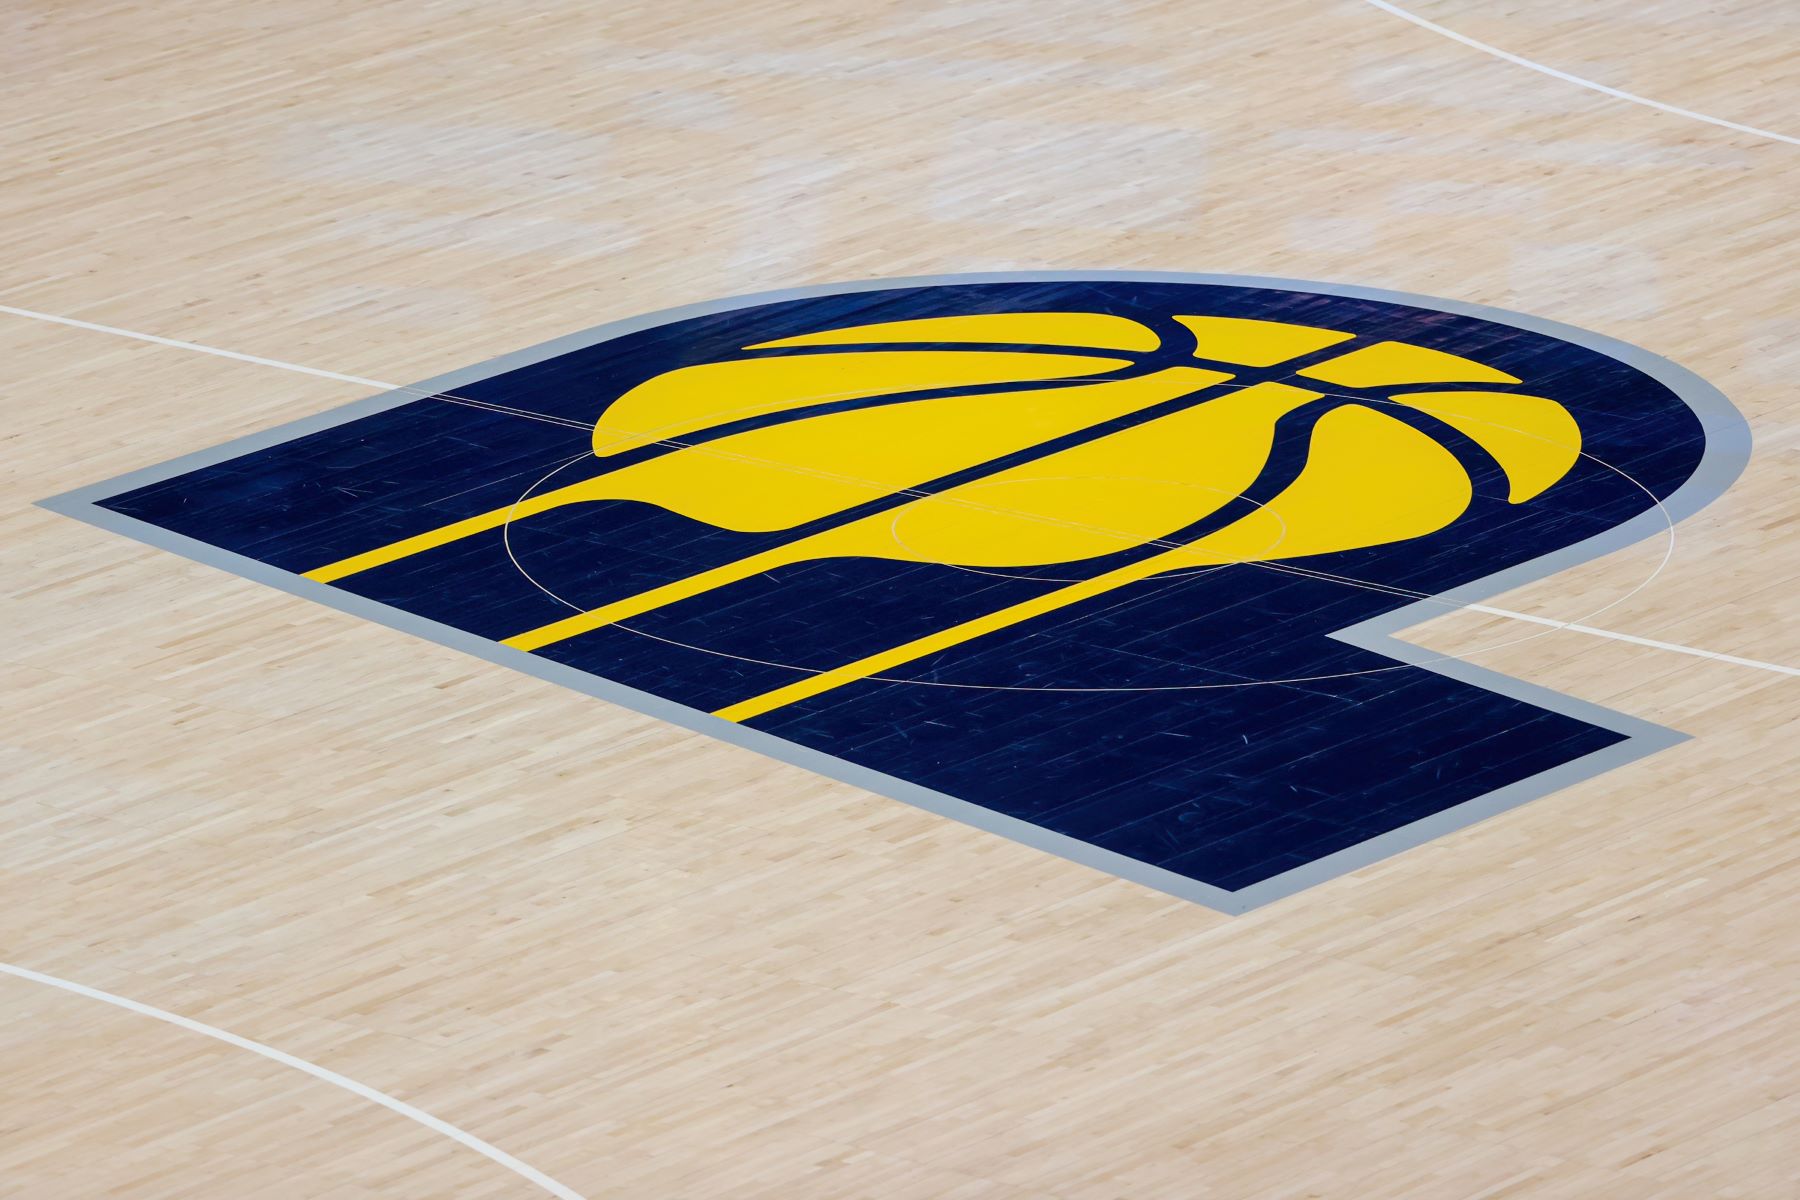 NBA team Indiana Pacers logo on the court before a game against the Charlotte Hornets